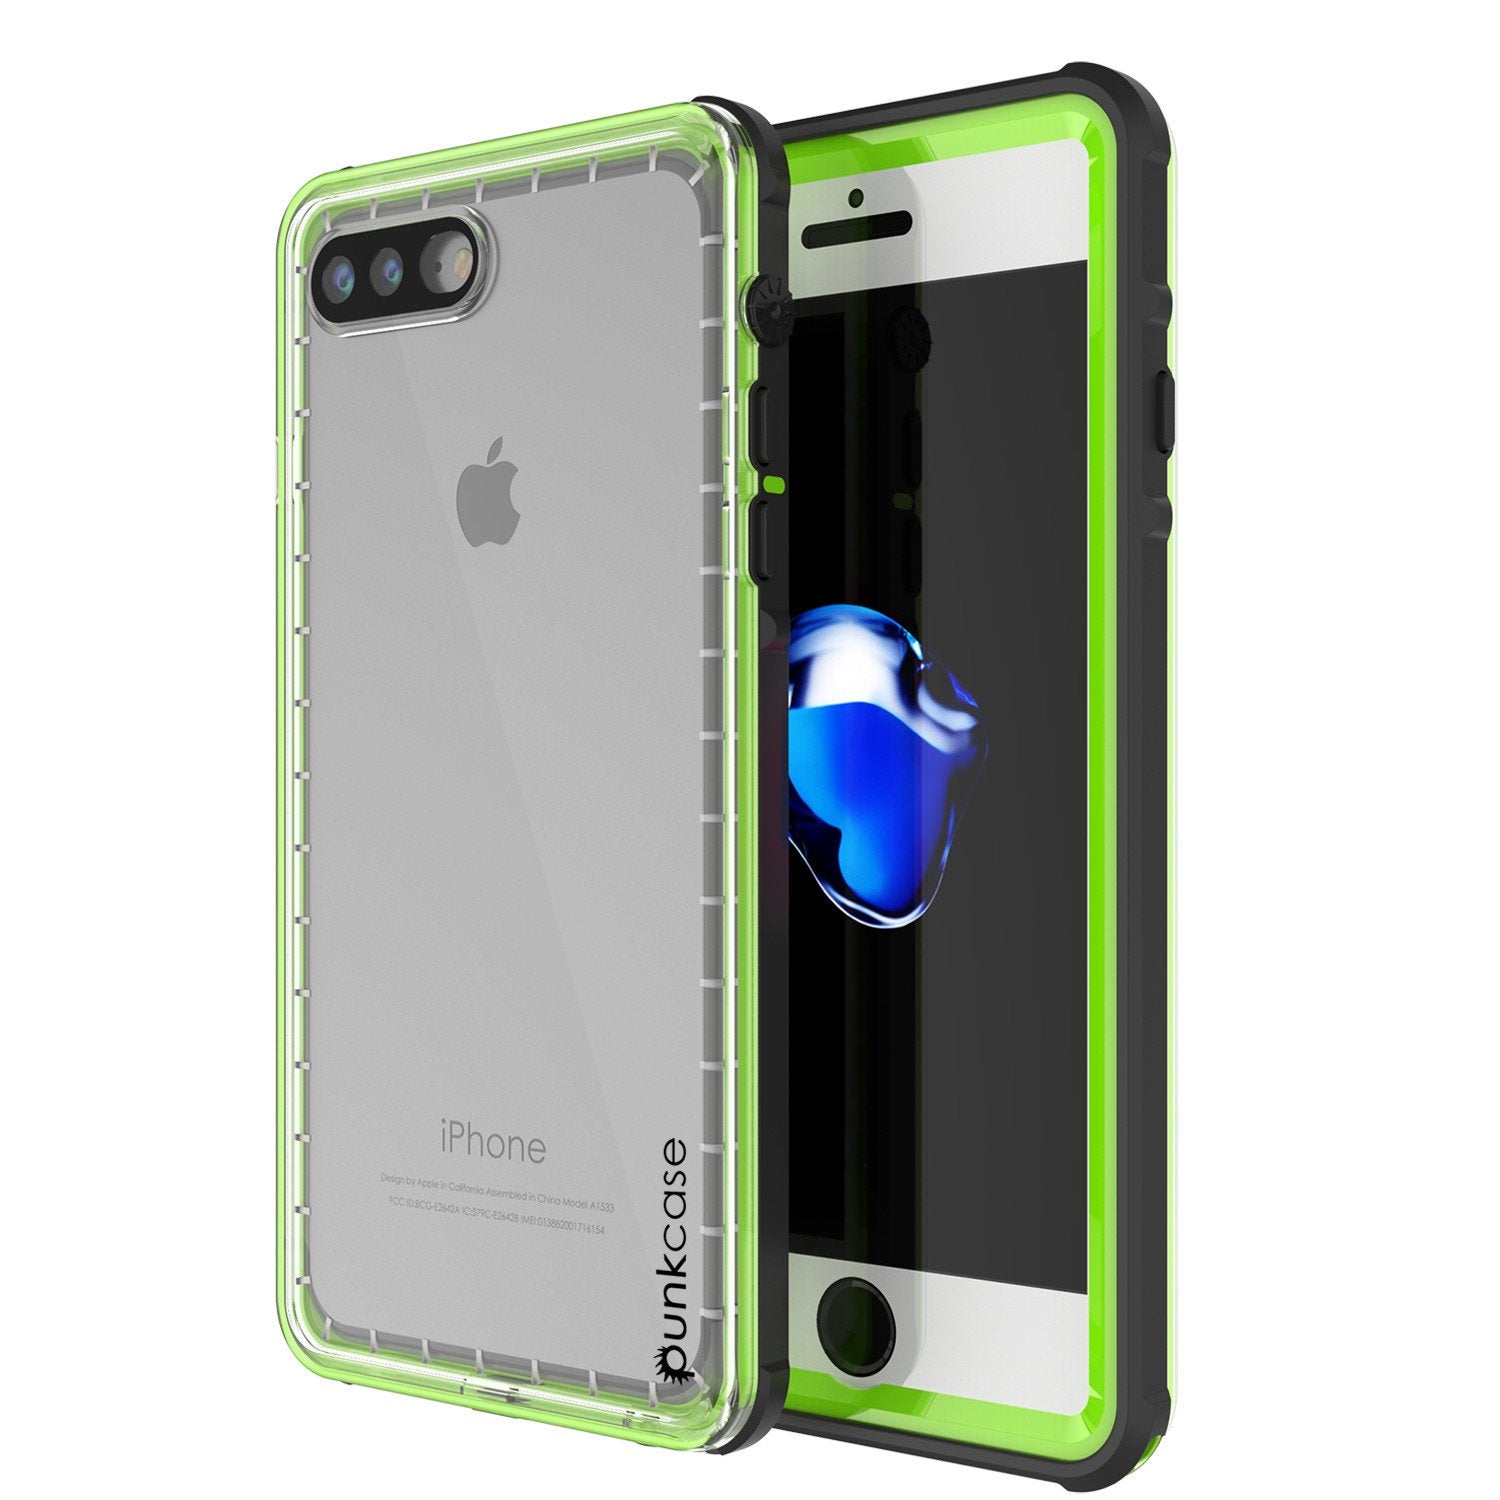 iPhone 7+ Plus Waterproof Case, PUNKcase CRYSTAL Light Green  W/ Attached Screen Protector  | Warranty - PunkCase NZ